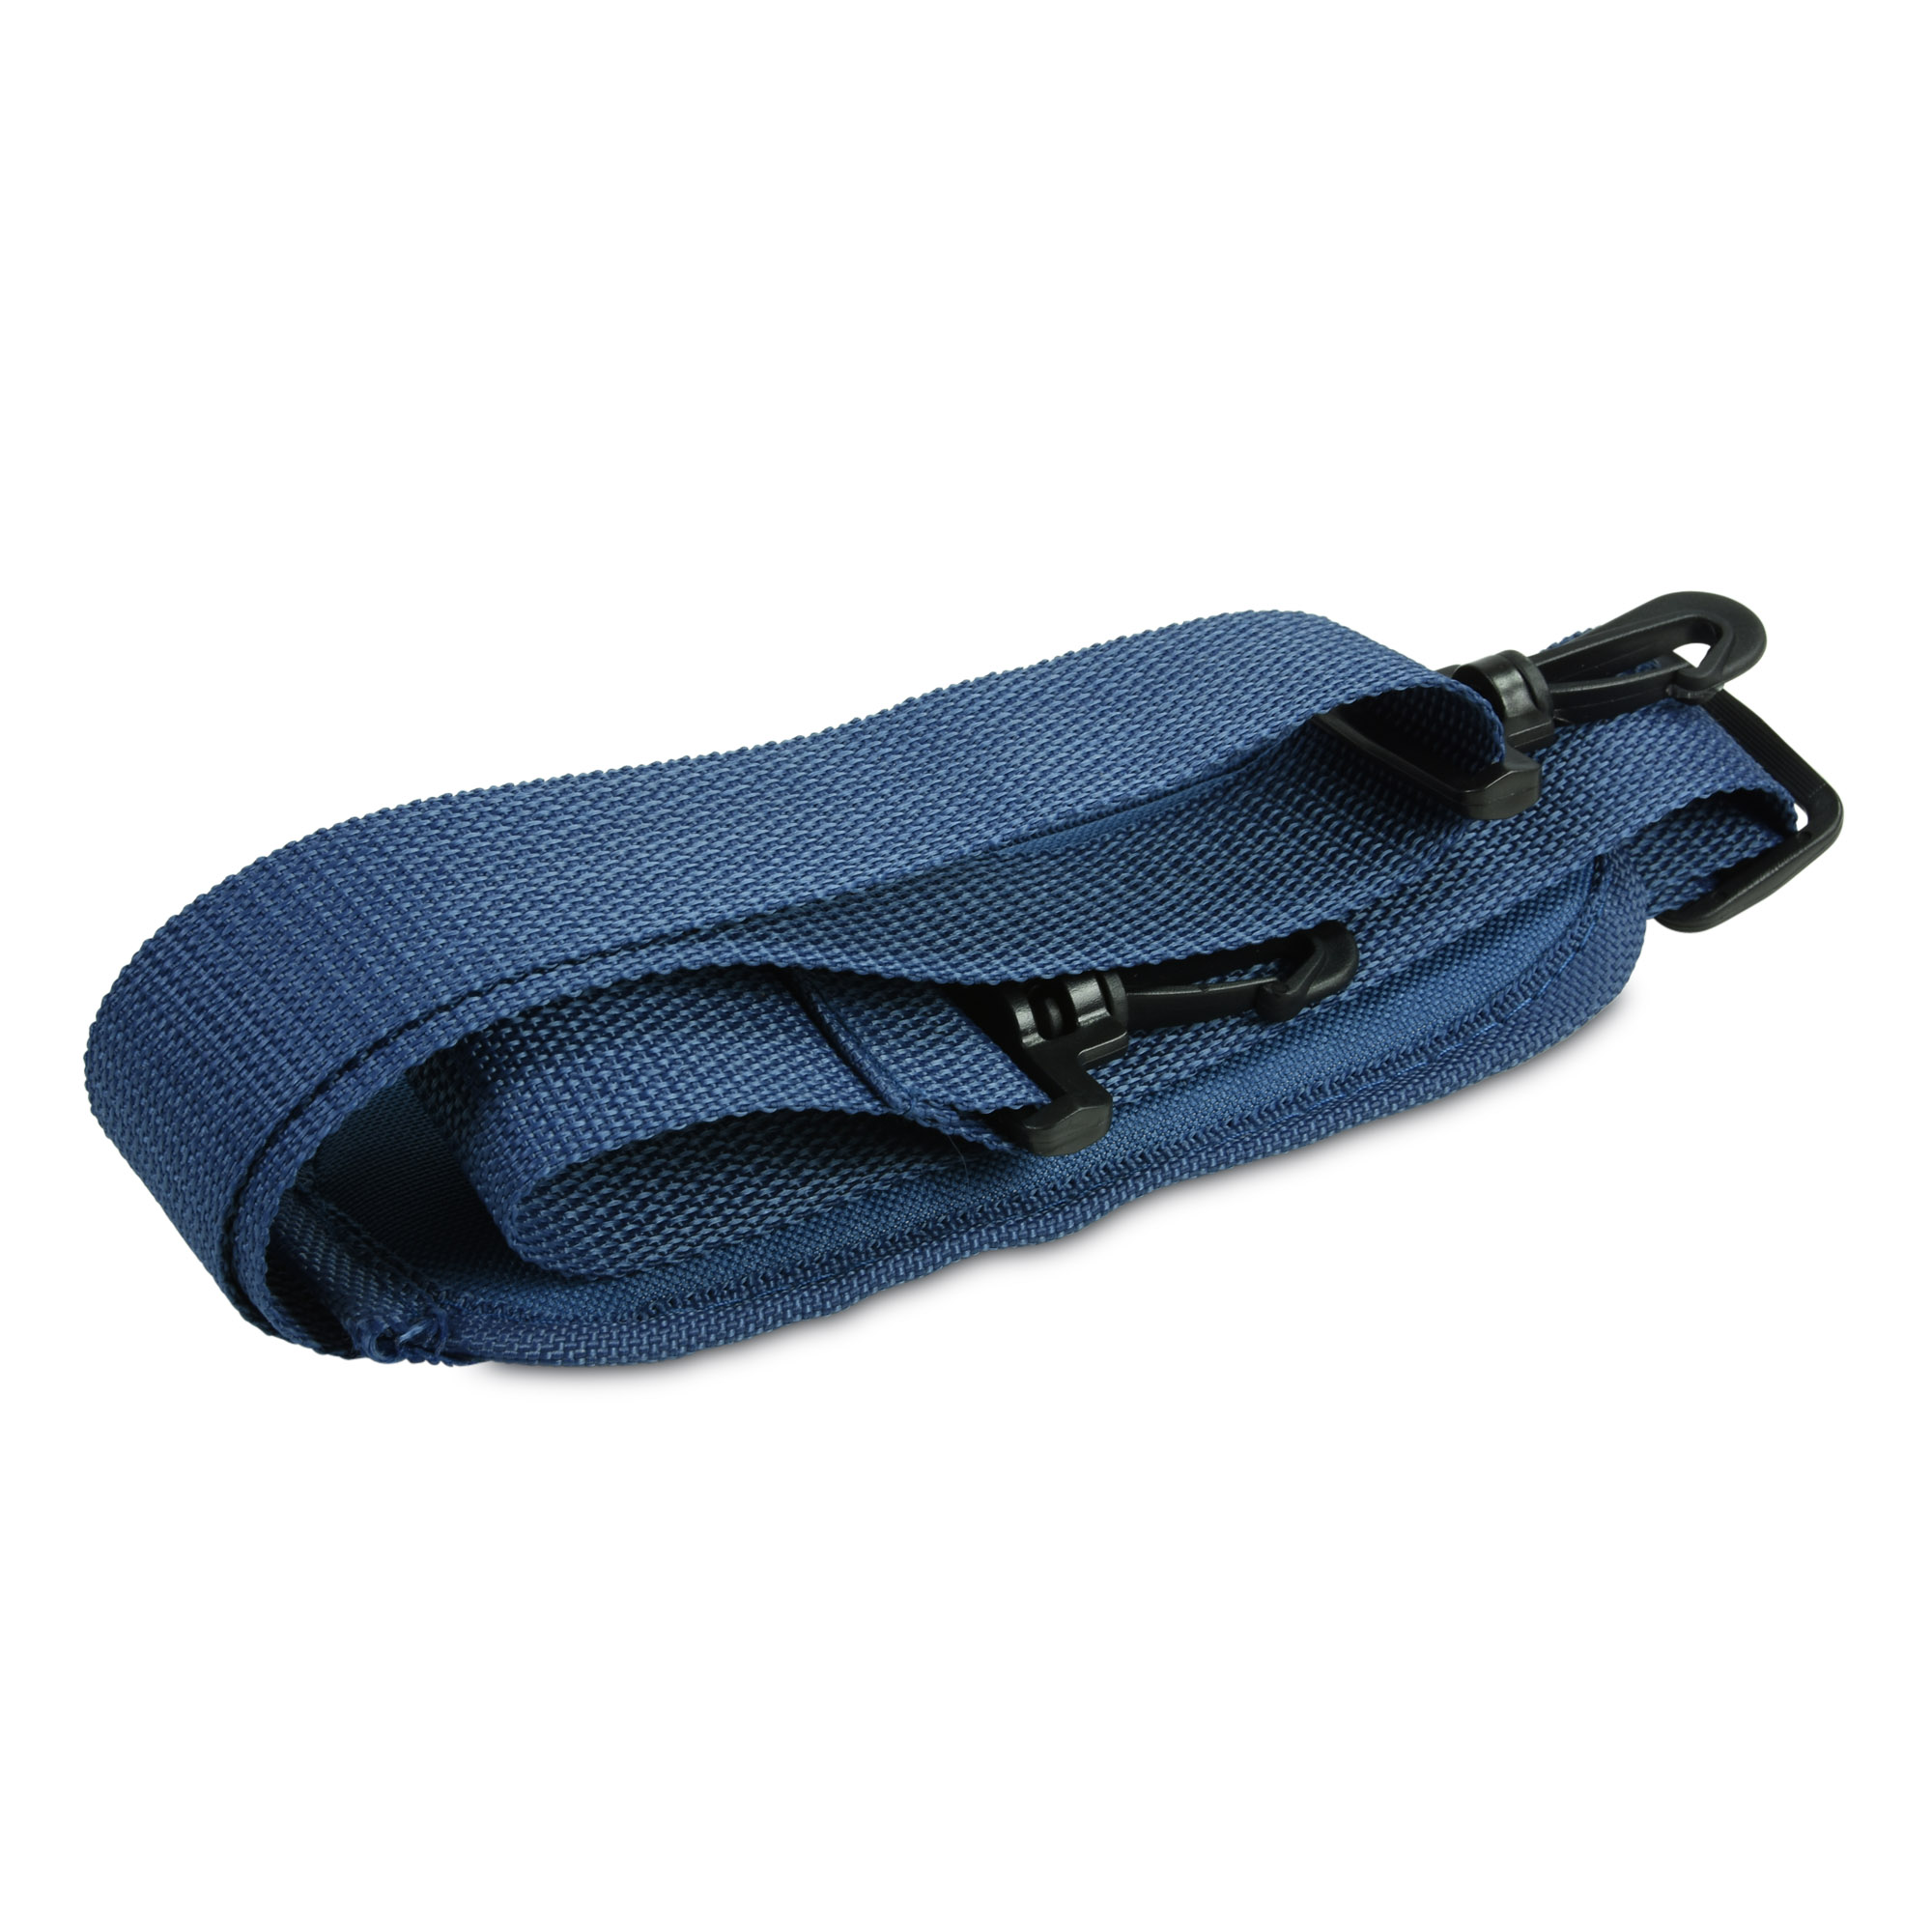 DALIX Premium Replacement Strap With Pad Laptop Travel Duffle Bag In Navy Blue - image 2 of 5